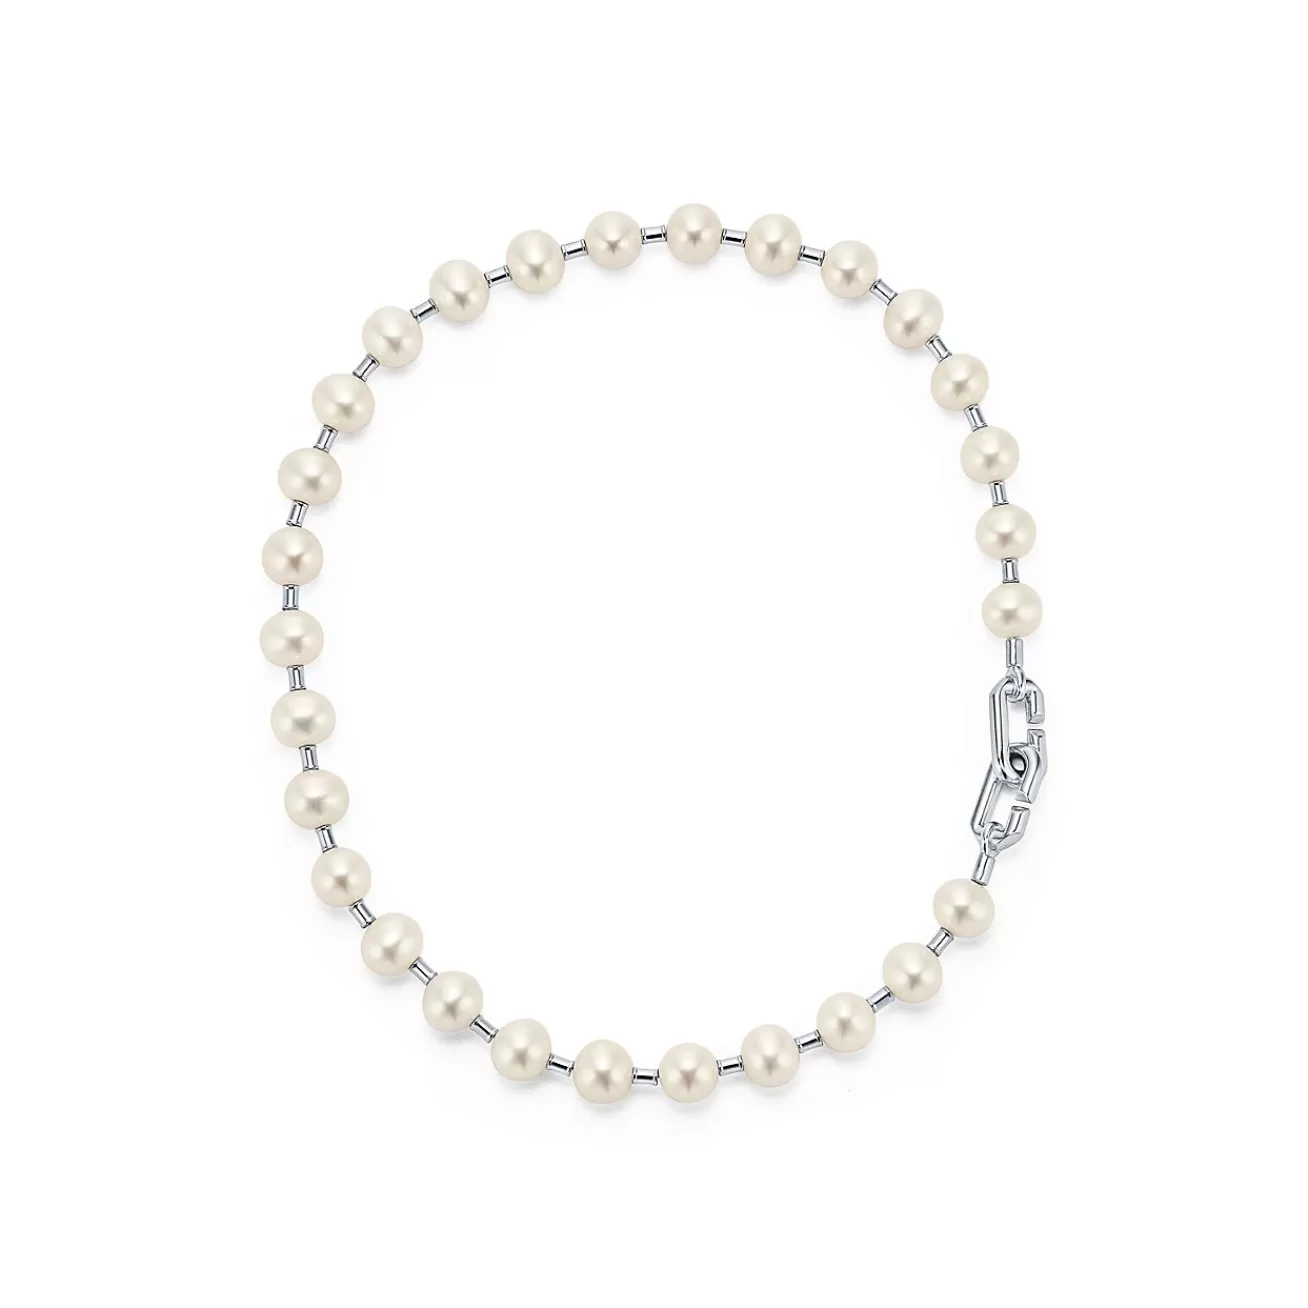 Tiffany & Co. Tiffany HardWear freshwater pearl necklace in sterling silver. | ^ Necklaces & Pendants | Gifts for Her